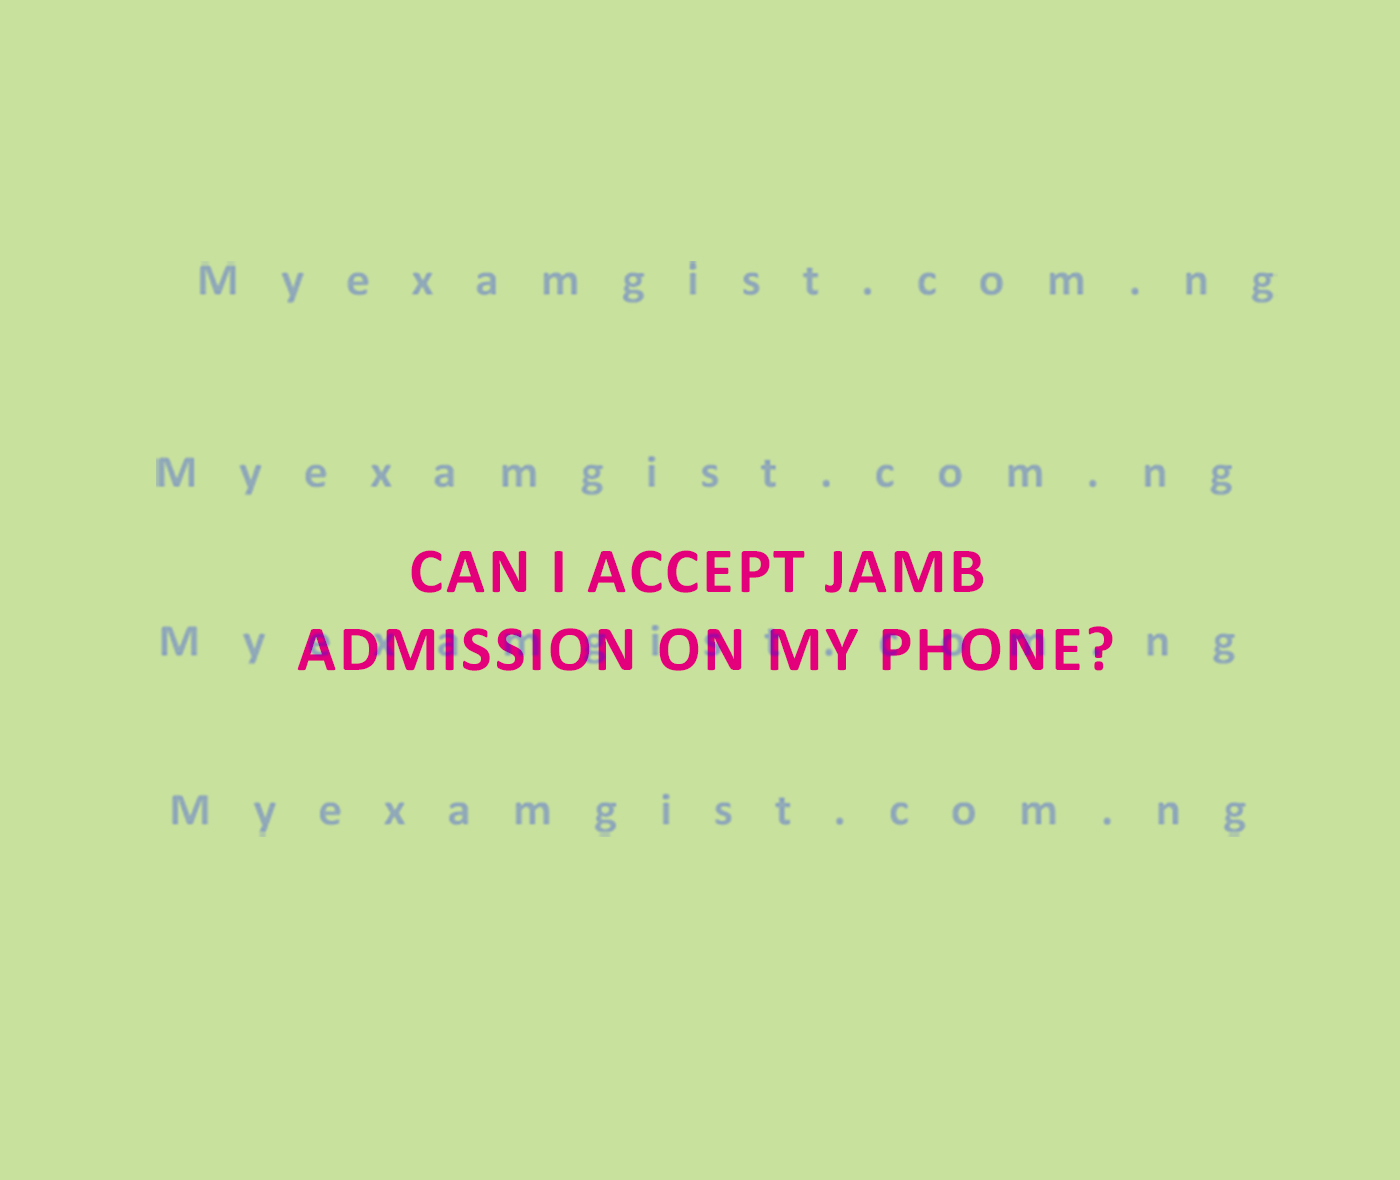 Can I accept JAMB admission on my phone?